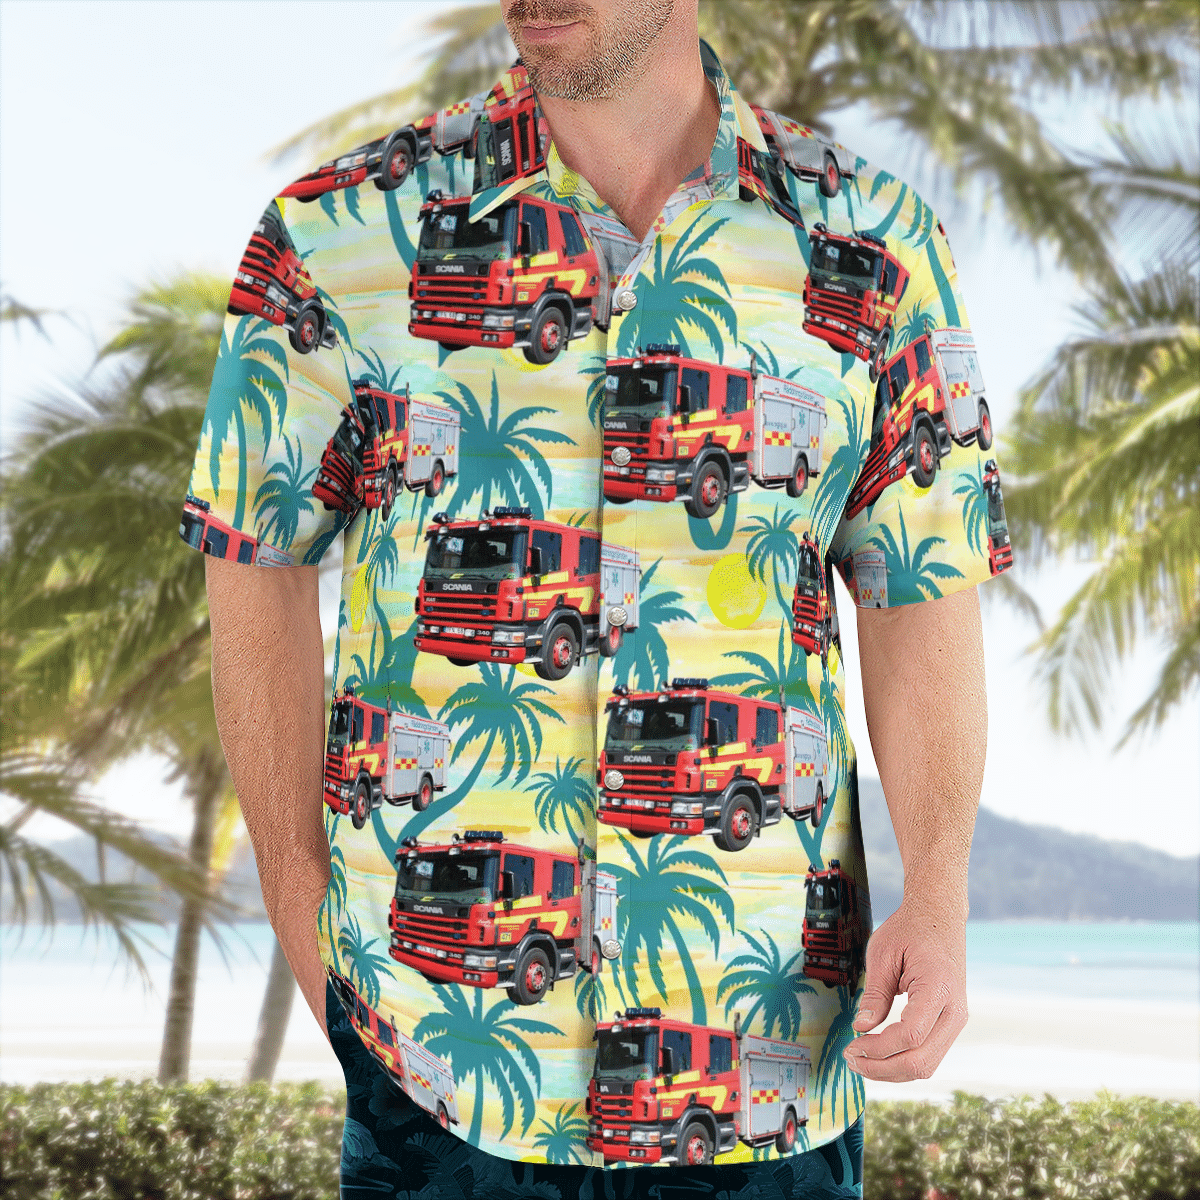 There are several styles of beach and Hawaiian shorts and tops to choose from 40